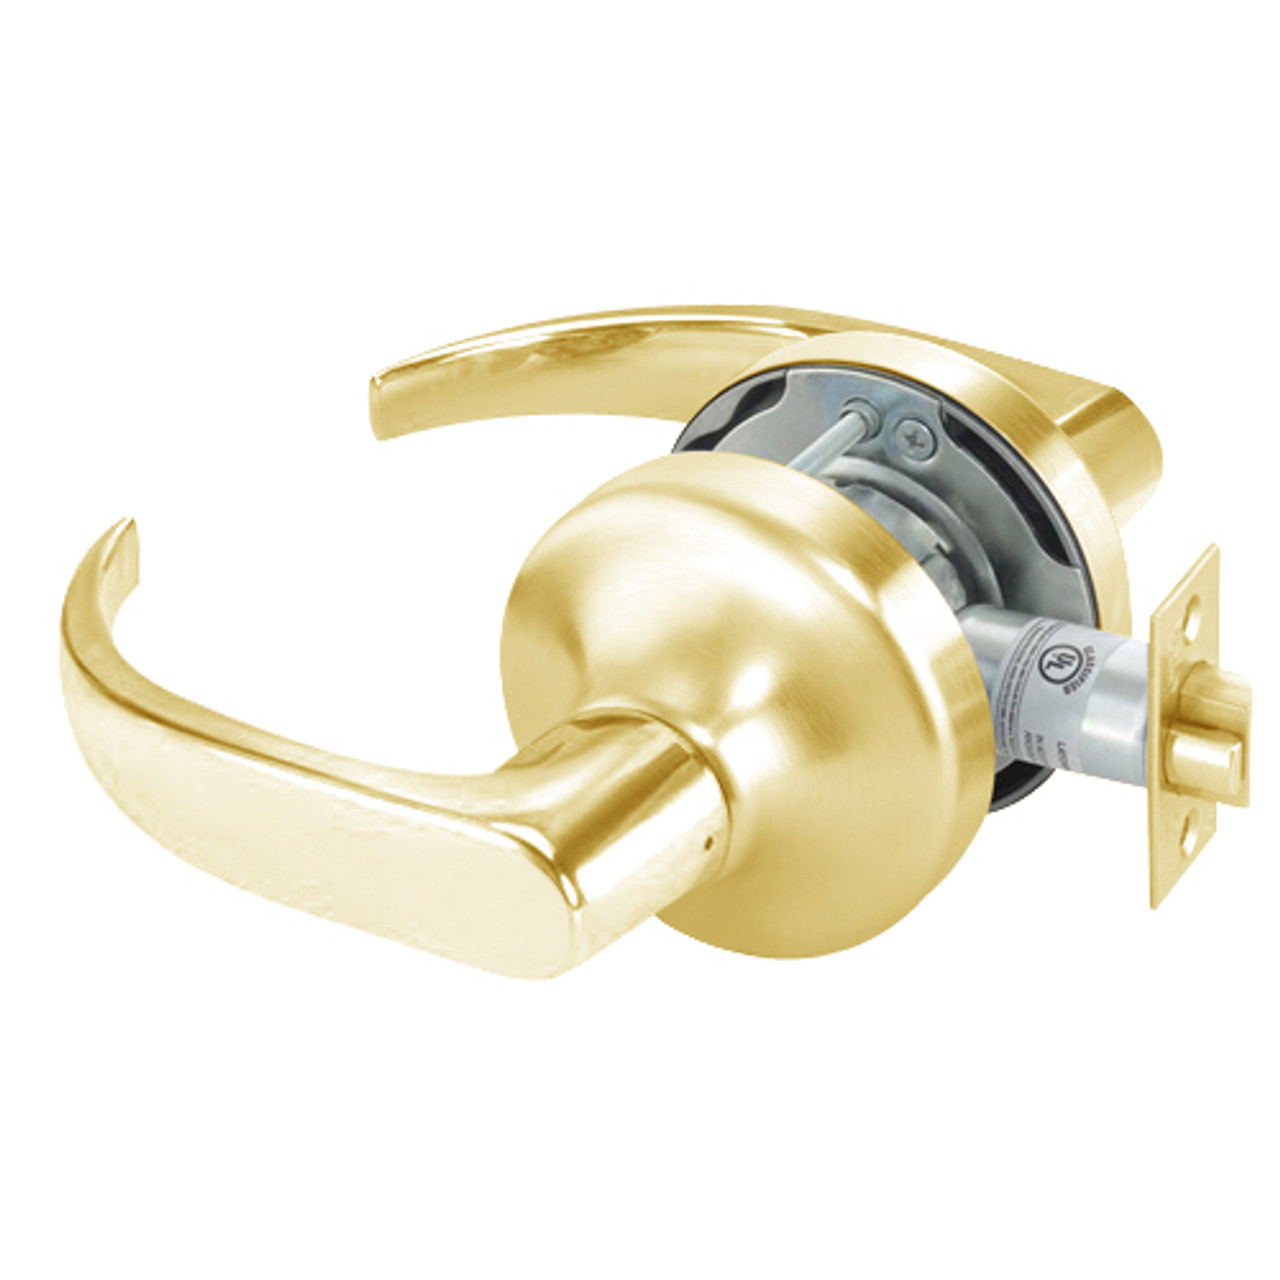 PB4709LN-605 Yale 4700LN Series Non Keyed Exit Latch Cylindrical Lock with Pacific Beach Lever in Bright Brass